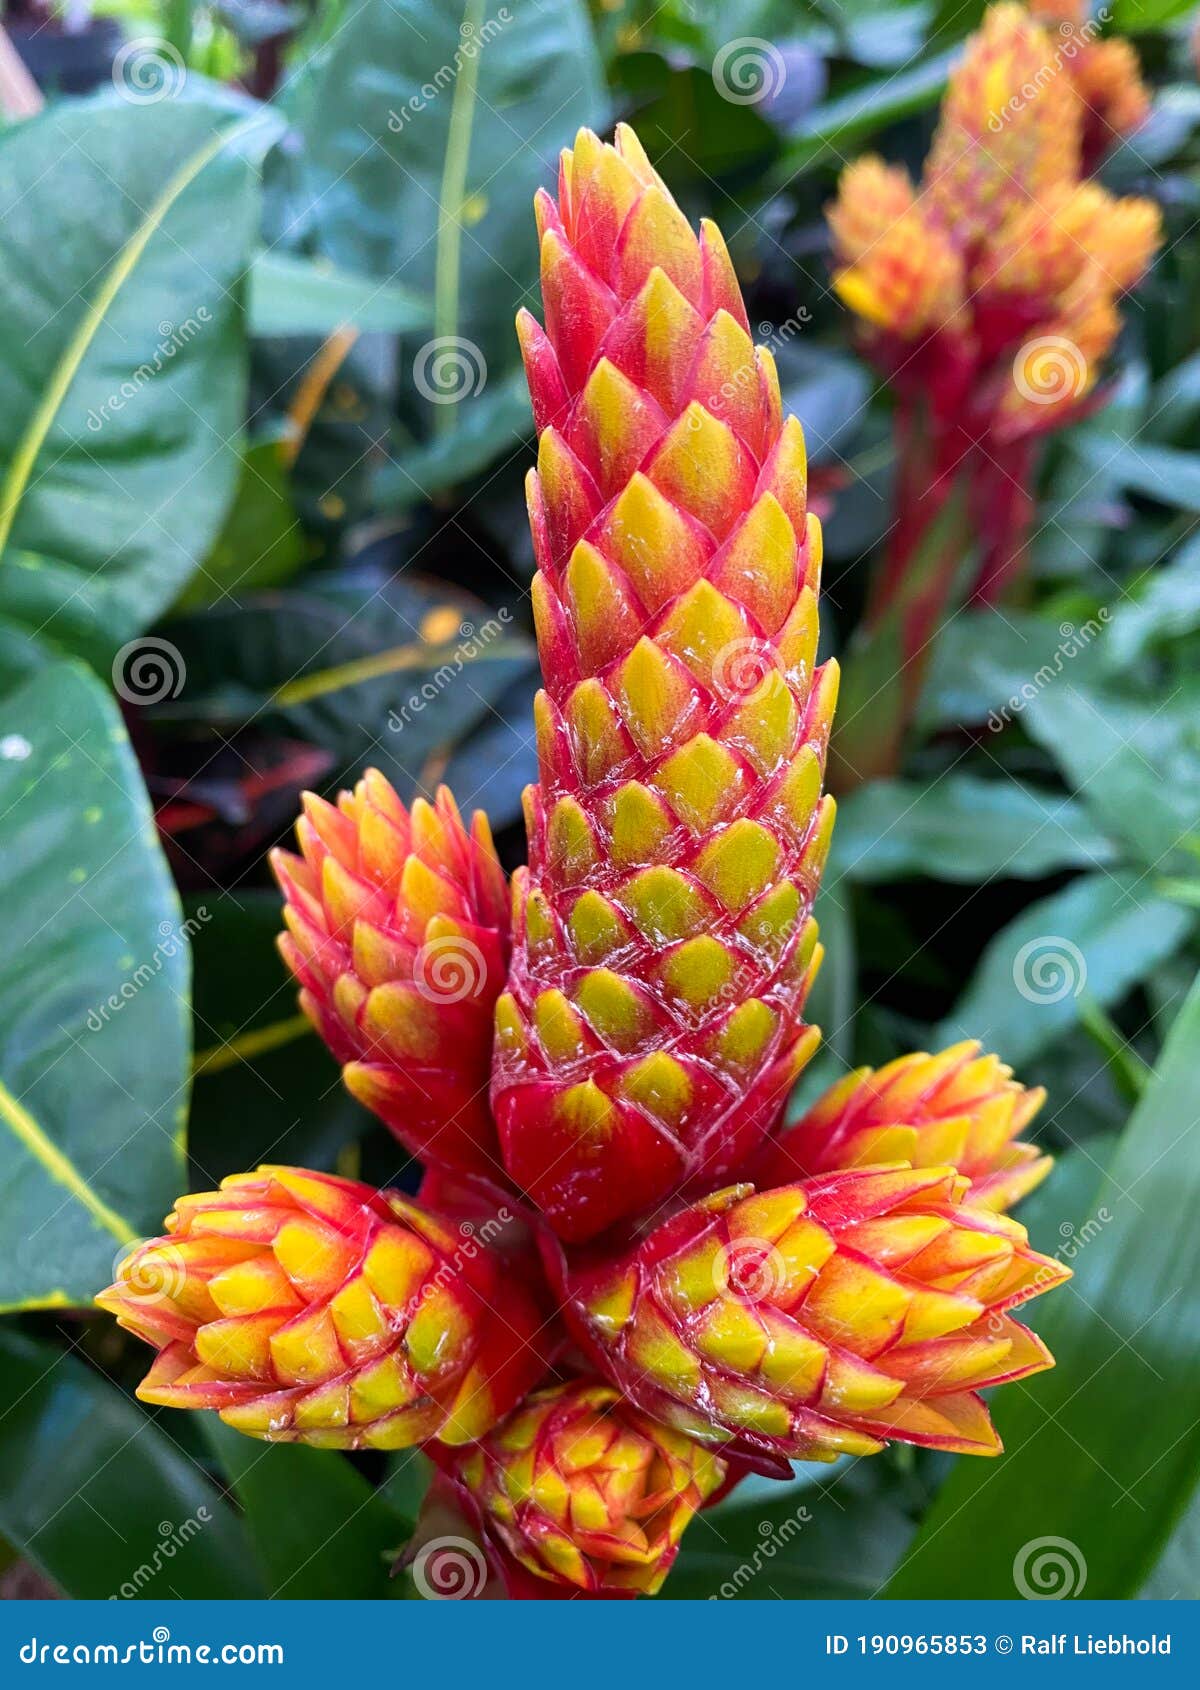 top view on  red  yellow flowers guzmania conifera with green leaves